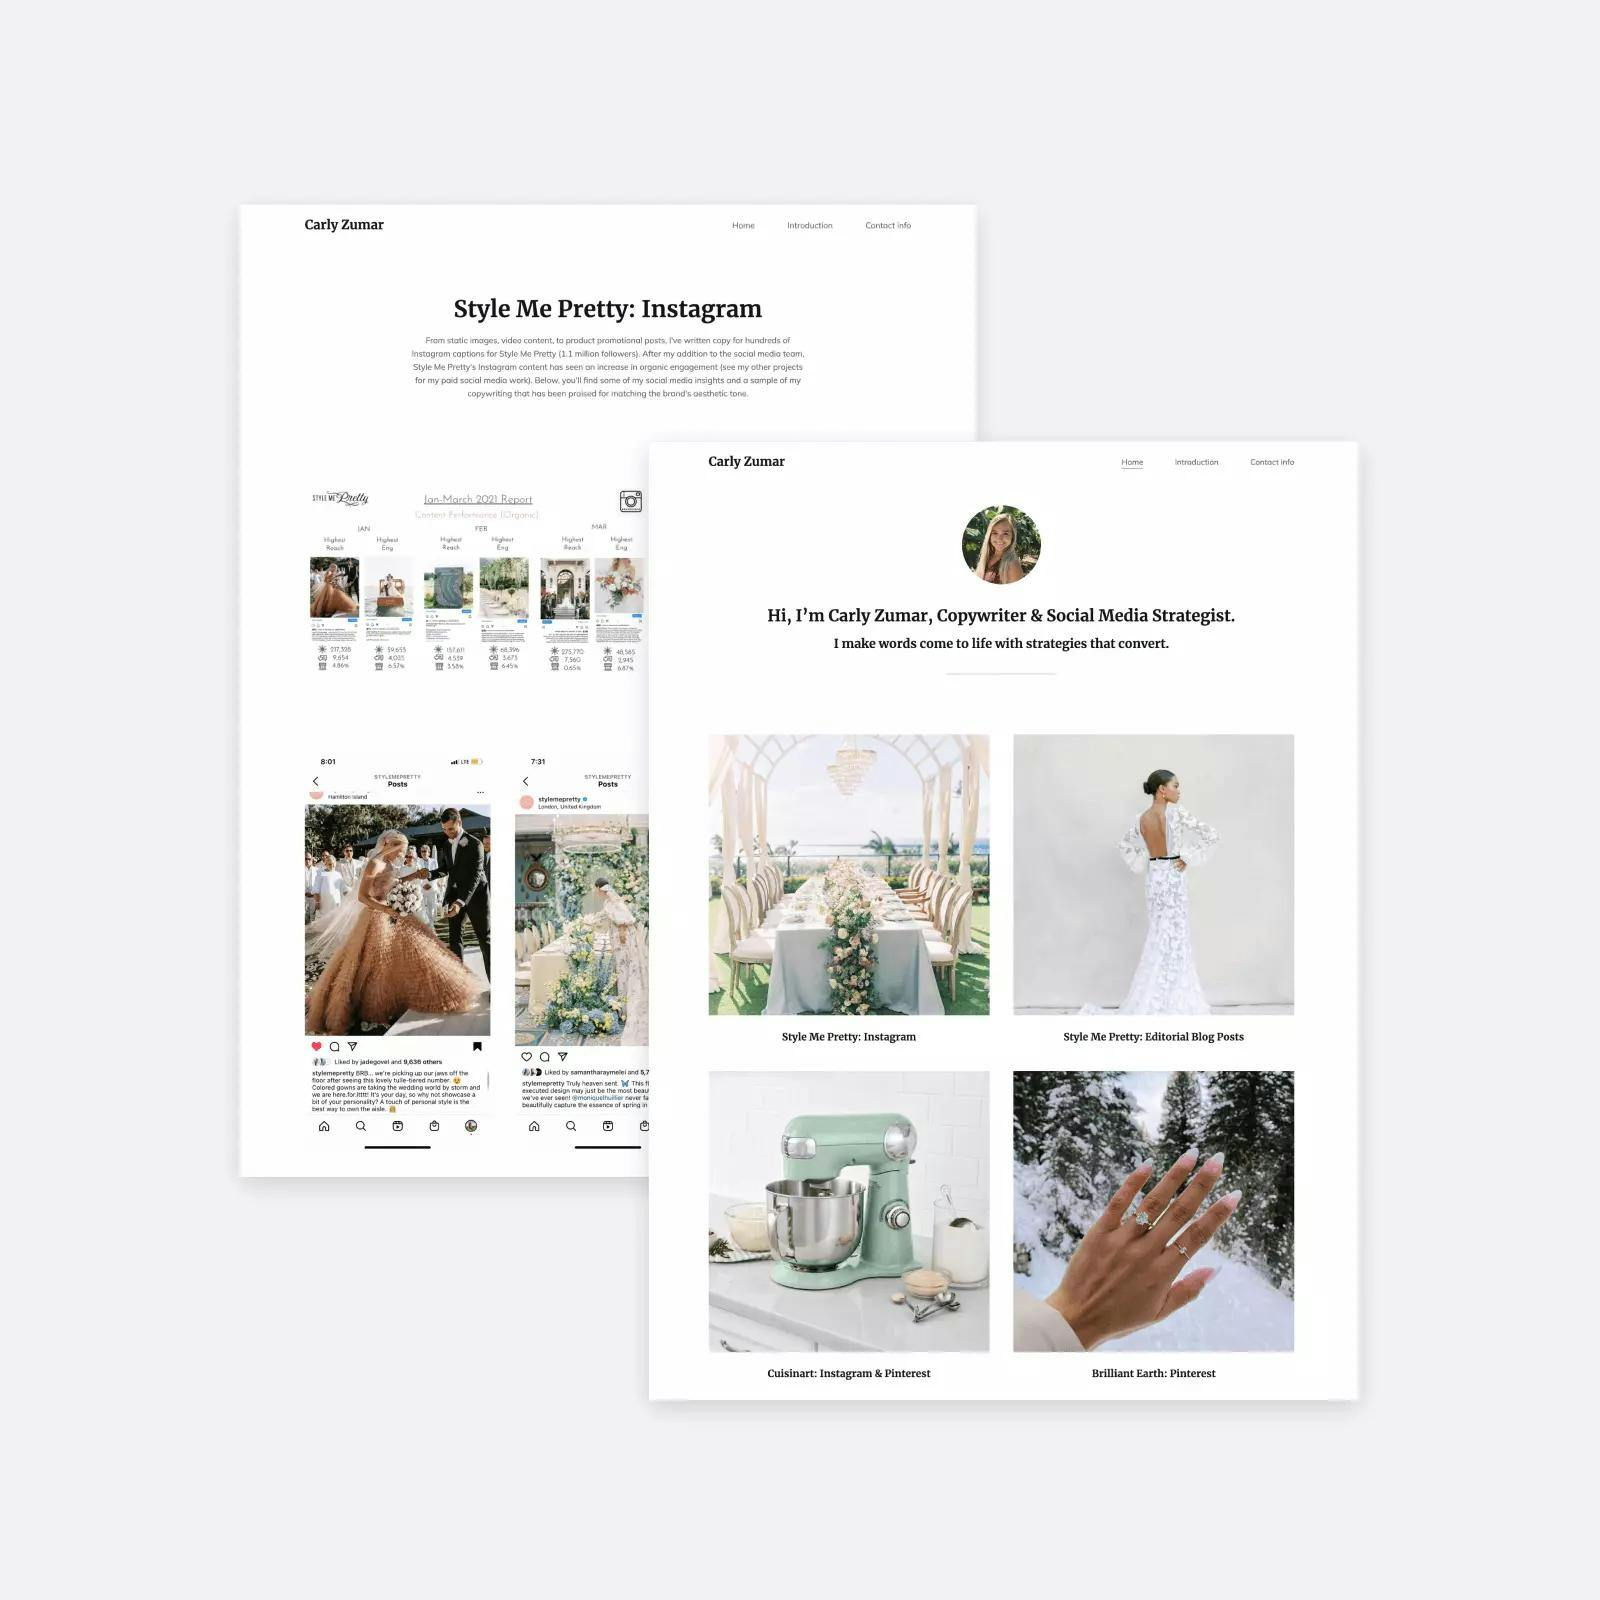 Pages from the copywriting and social media portfolio of Carly Zumar: her homepage featuring projects, and one of her Instagram case study pages.